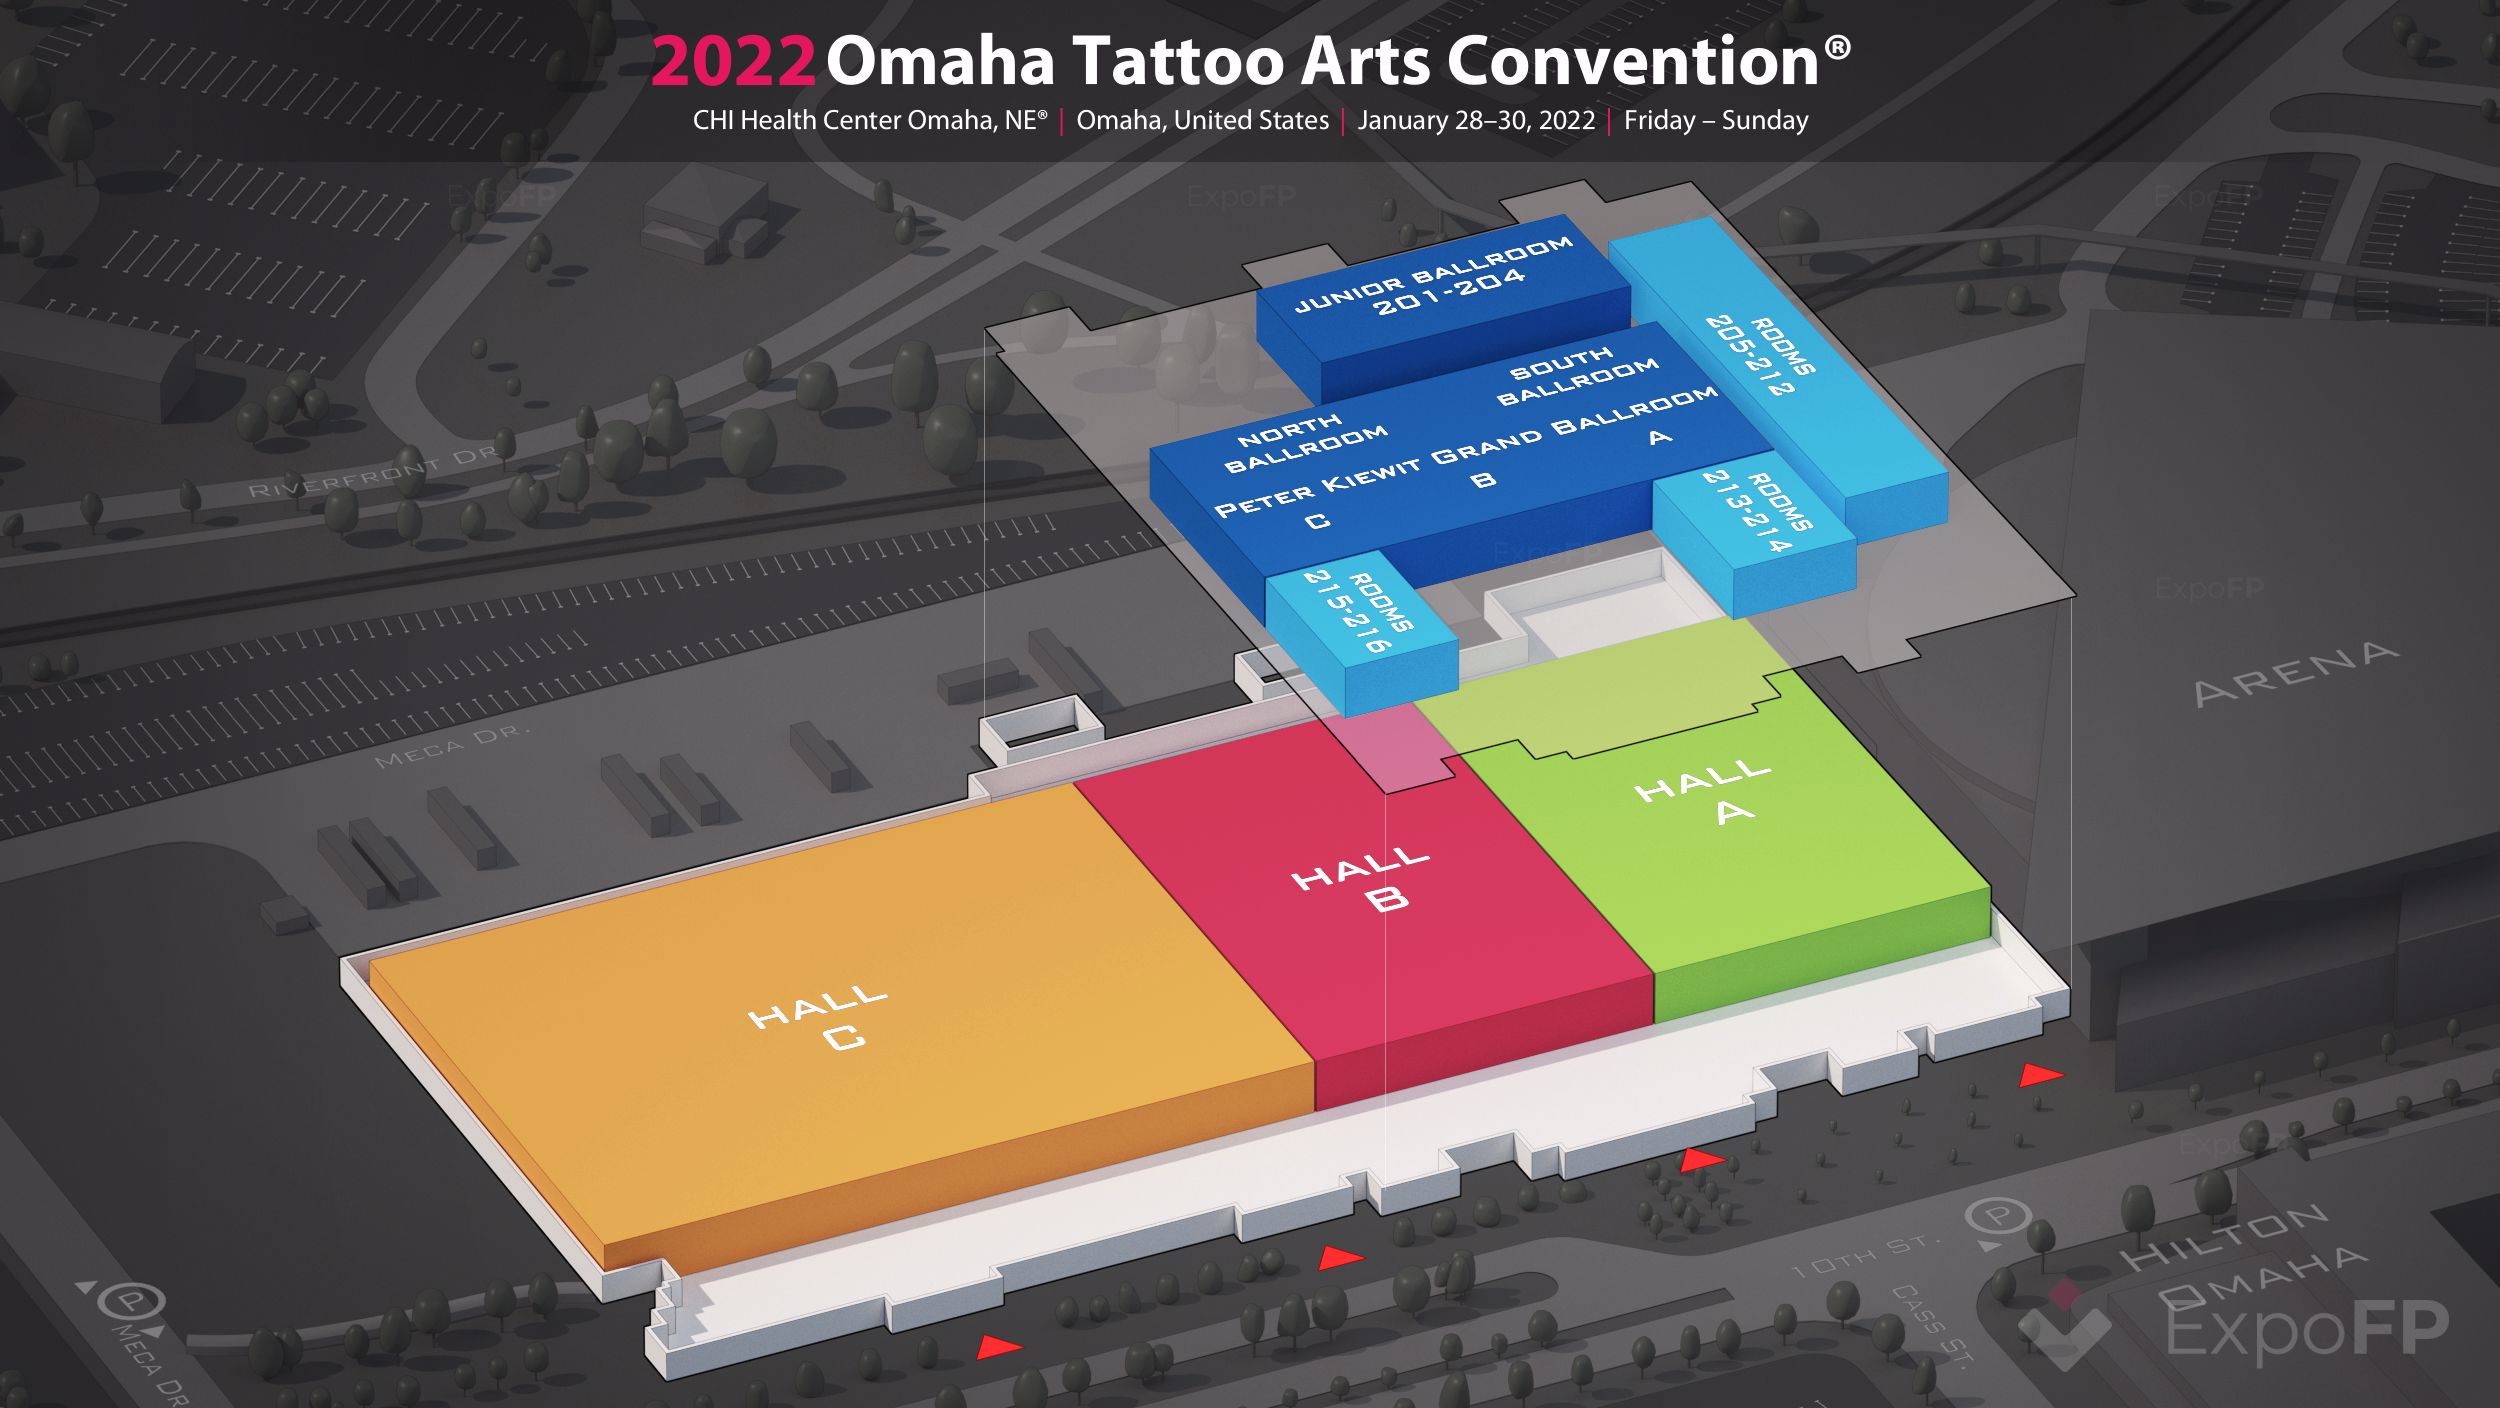 West Texas Tattoo to host Fall convention